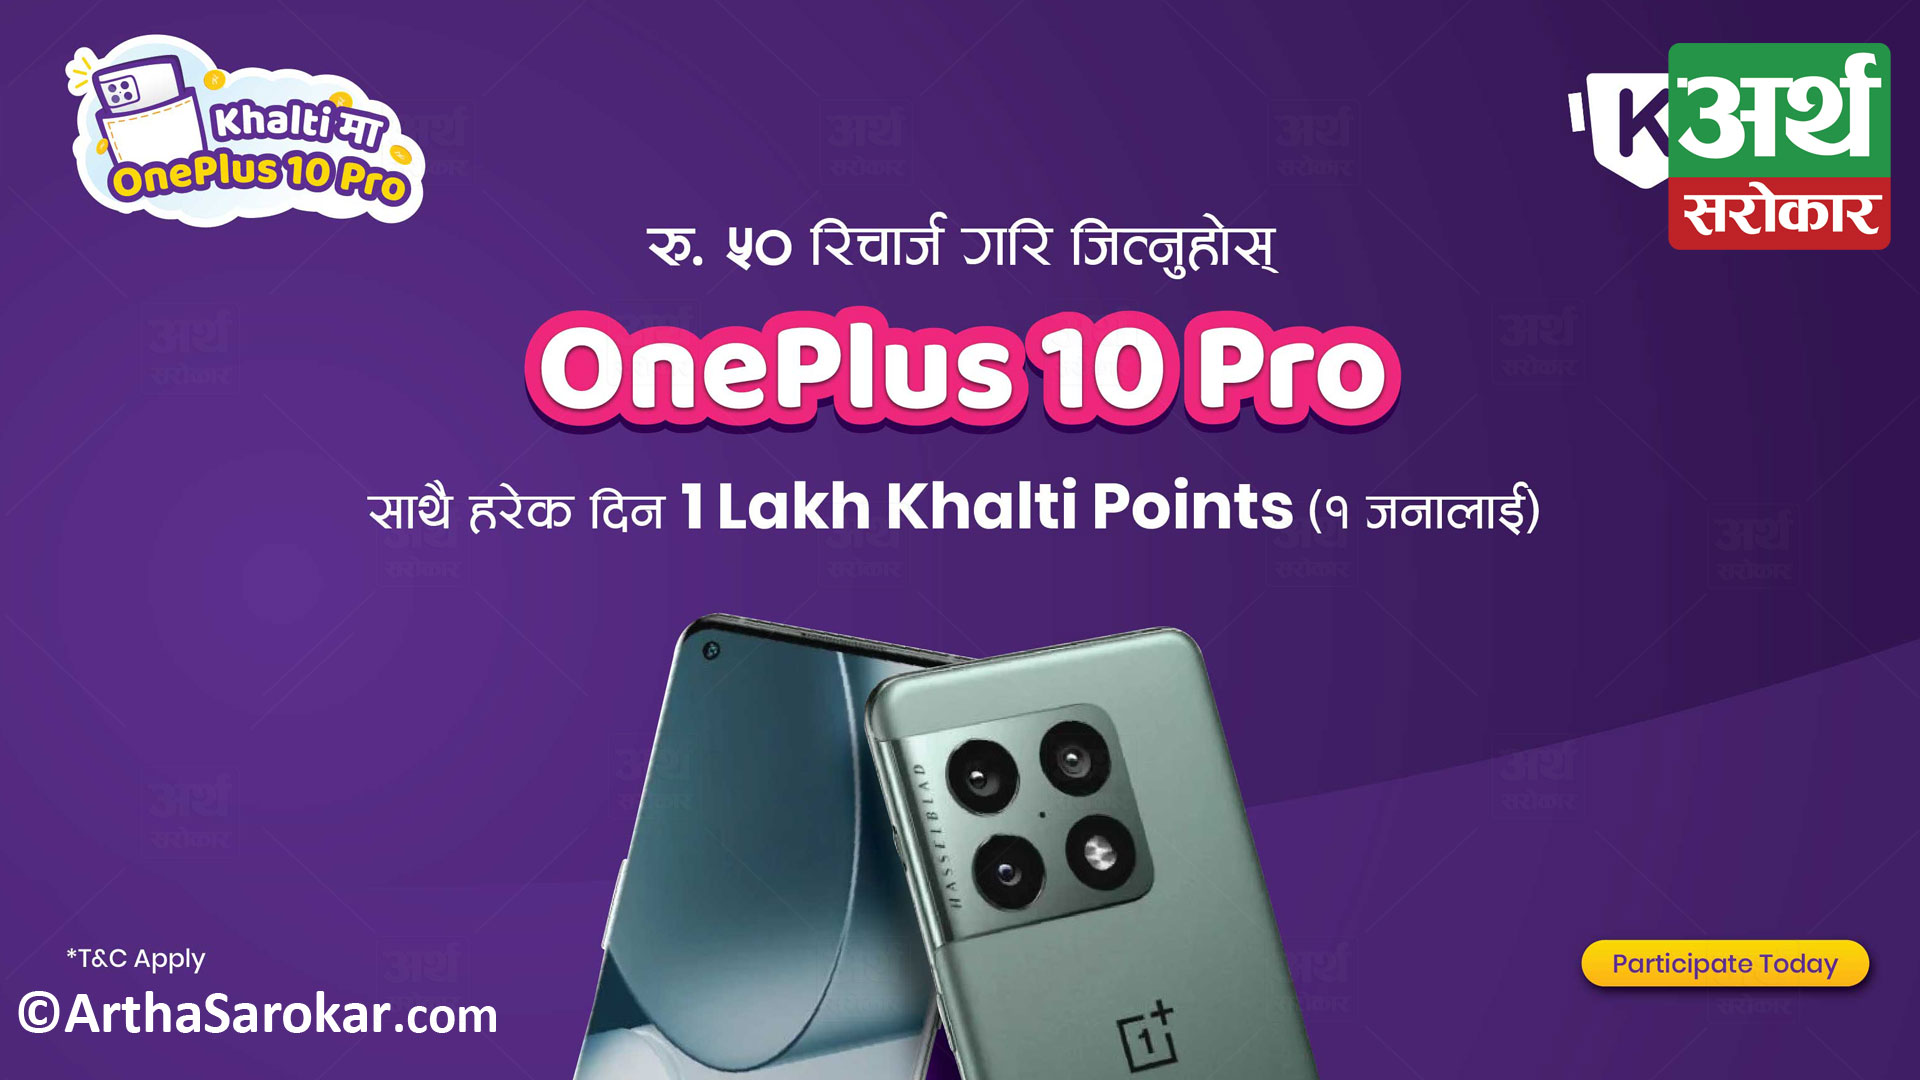 Win OnePlus 10 Pro worth Rs. 1,35,000 on recharge of Rs. 50 from Khalti